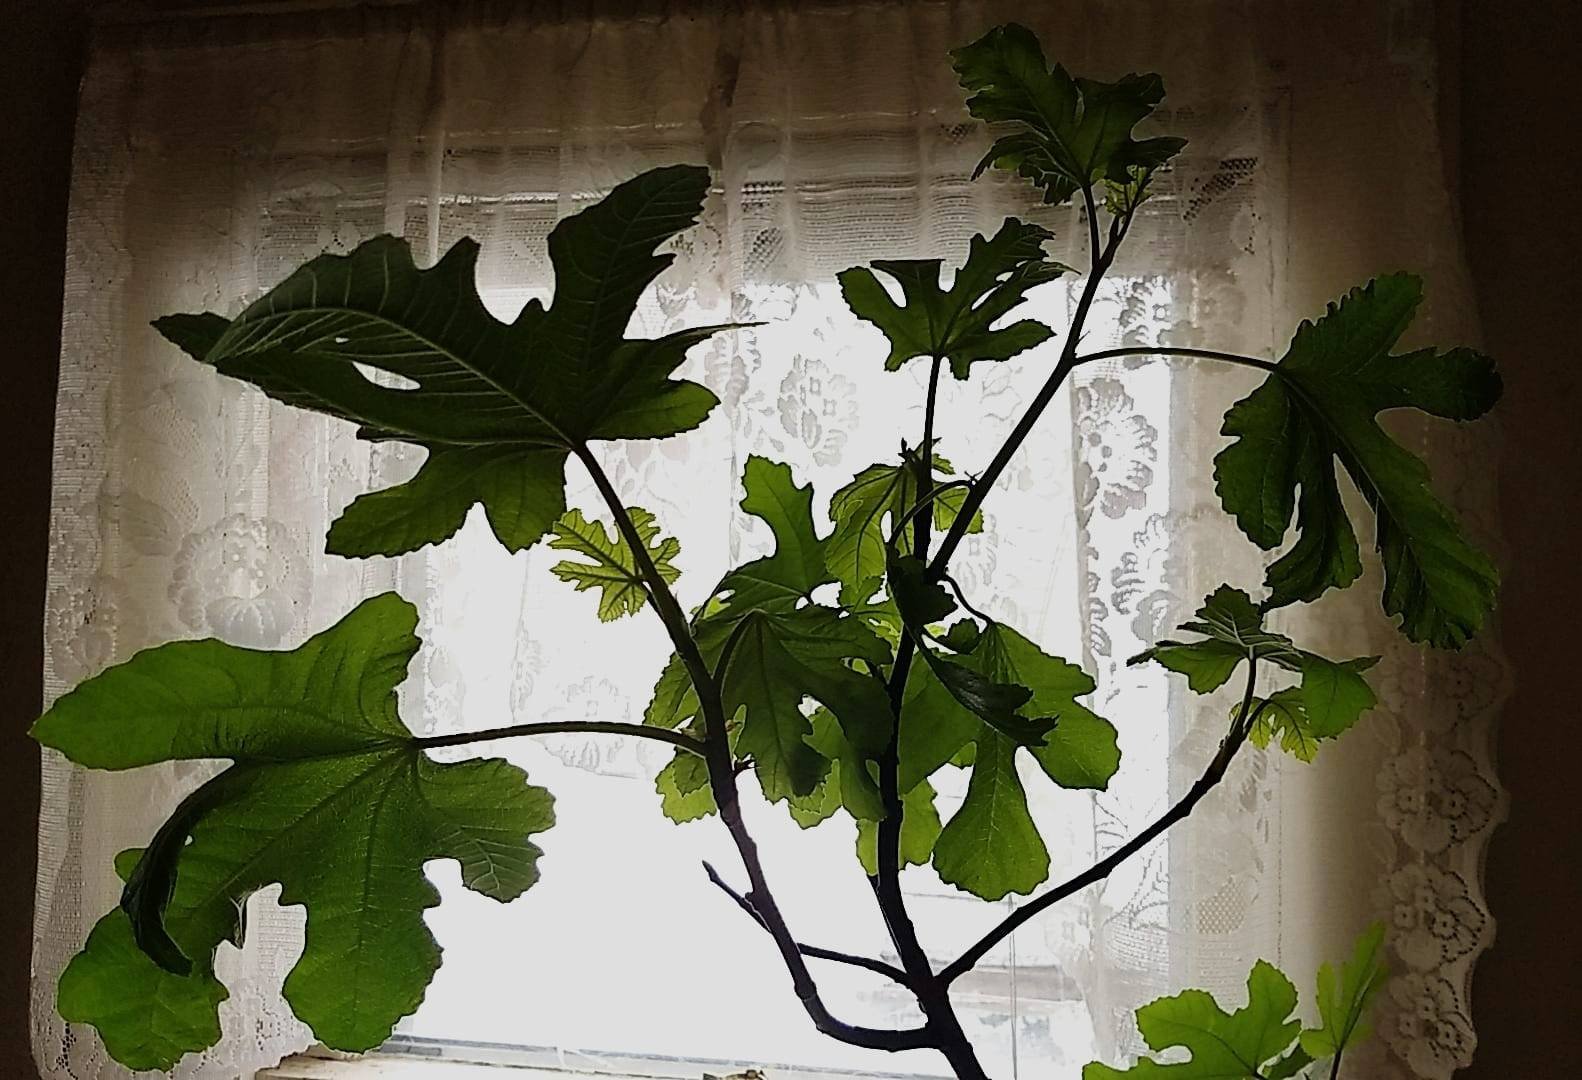 Our fig tree on Valentines day